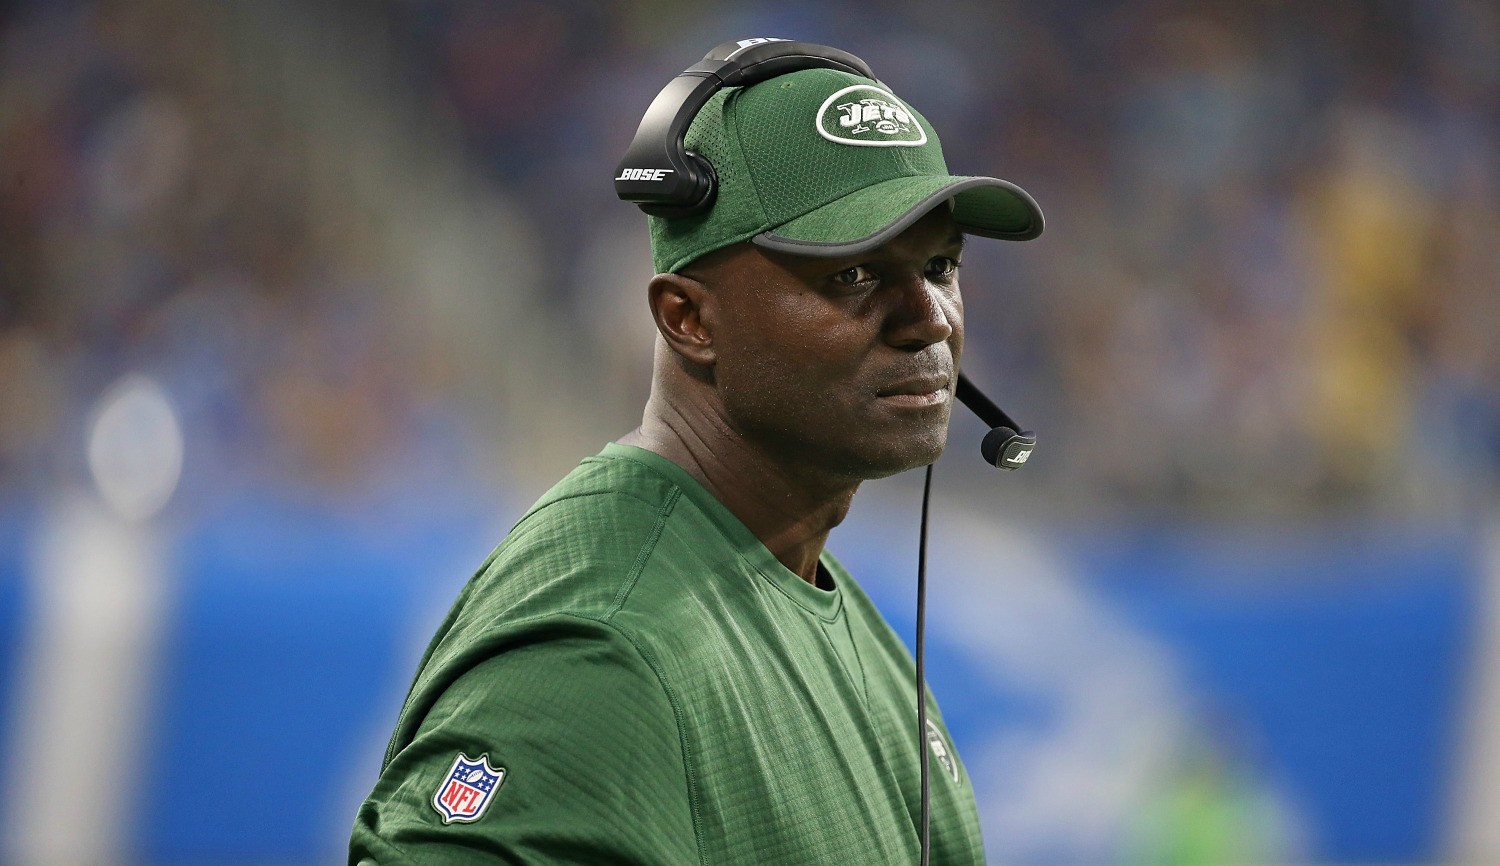 Report: Jets Head Coach Todd Bowles To Be Fired After Season’s Final Game